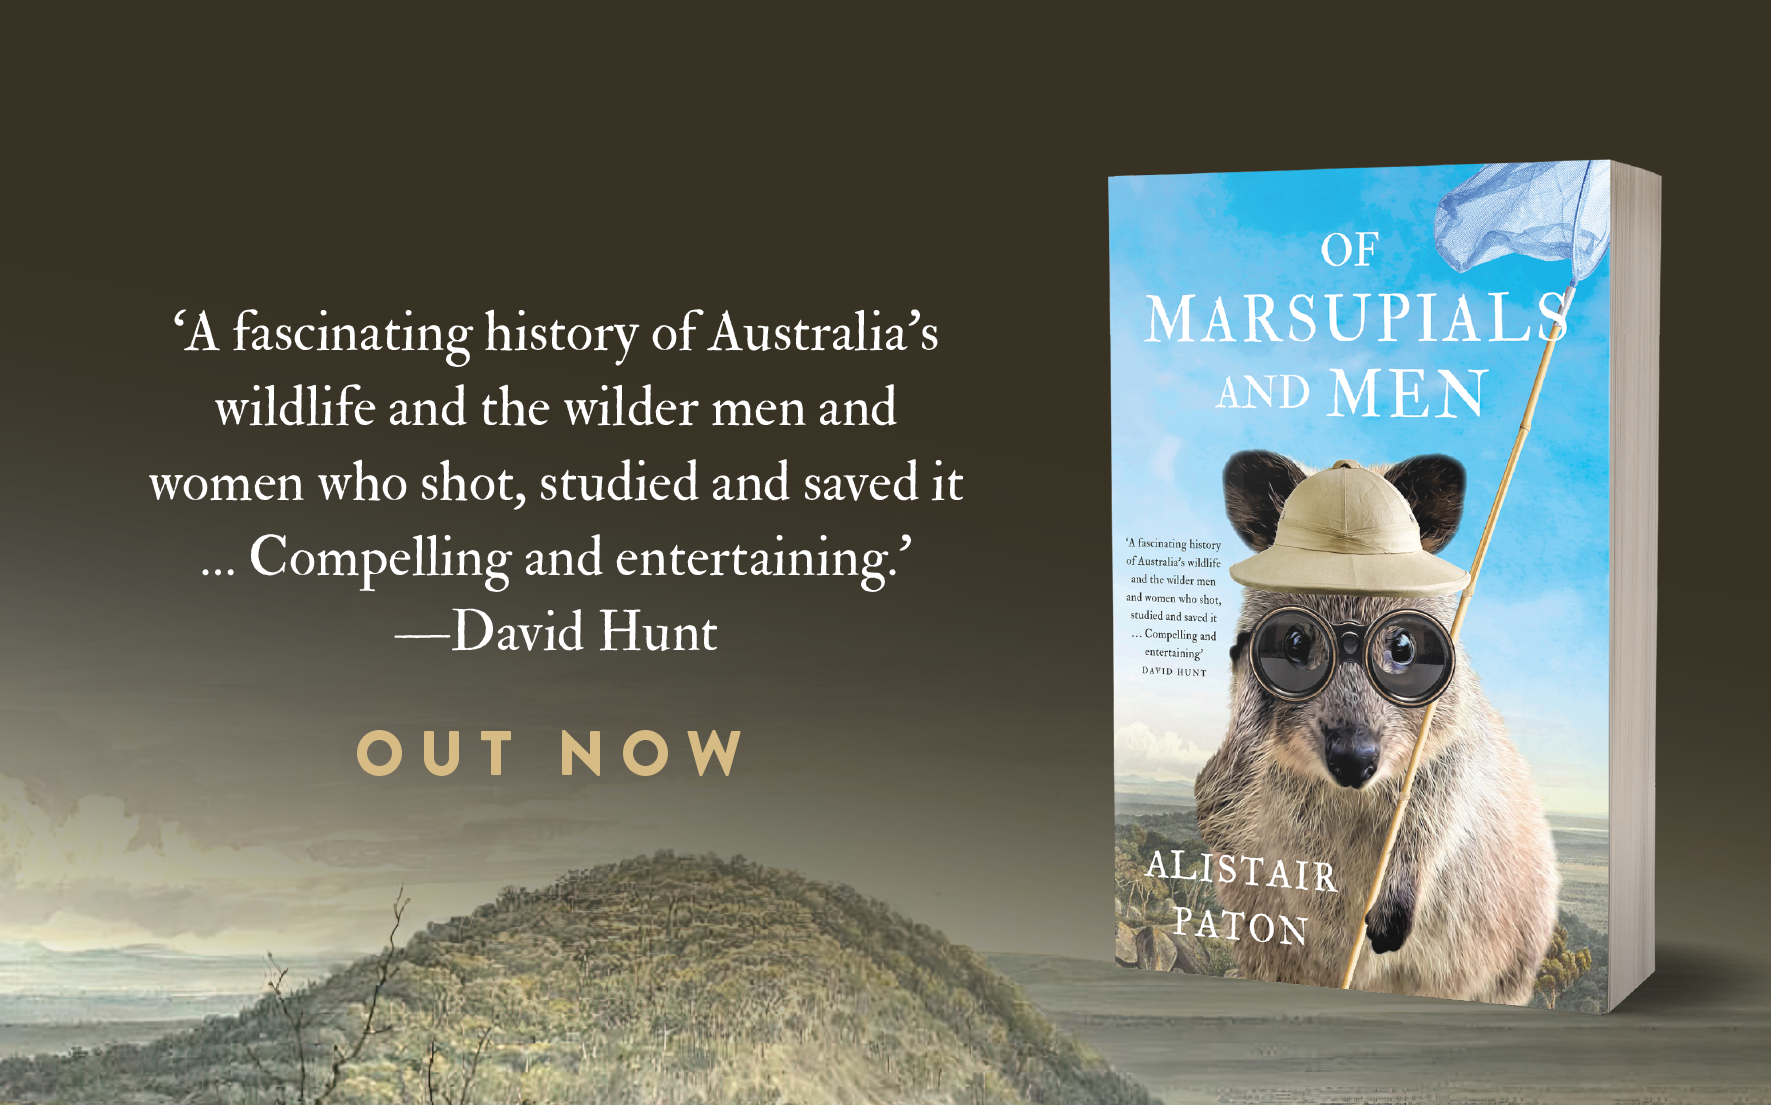 Out now: Of Marsupials and Men